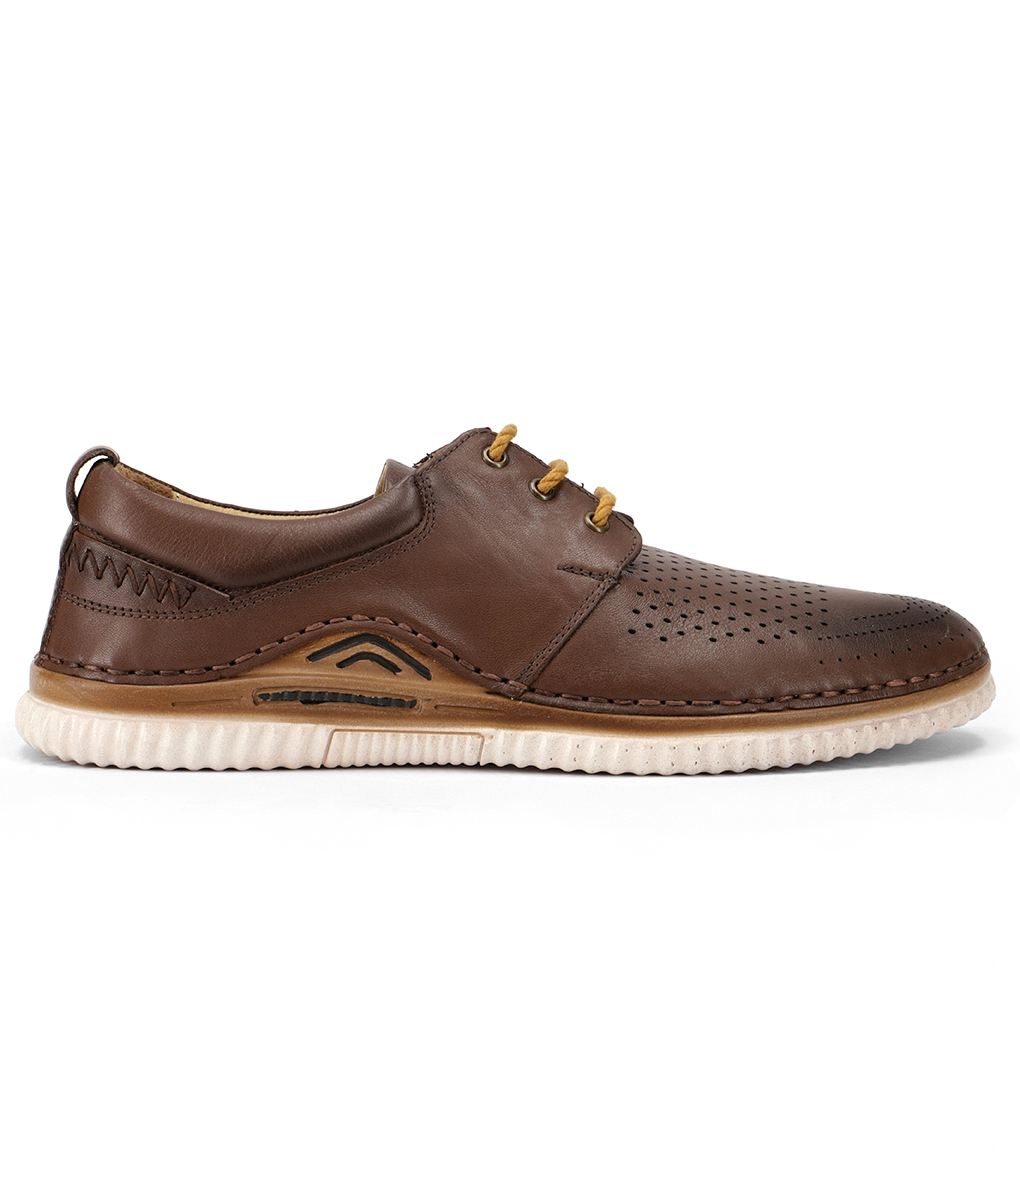 Men's Tan Real Leather Brogues